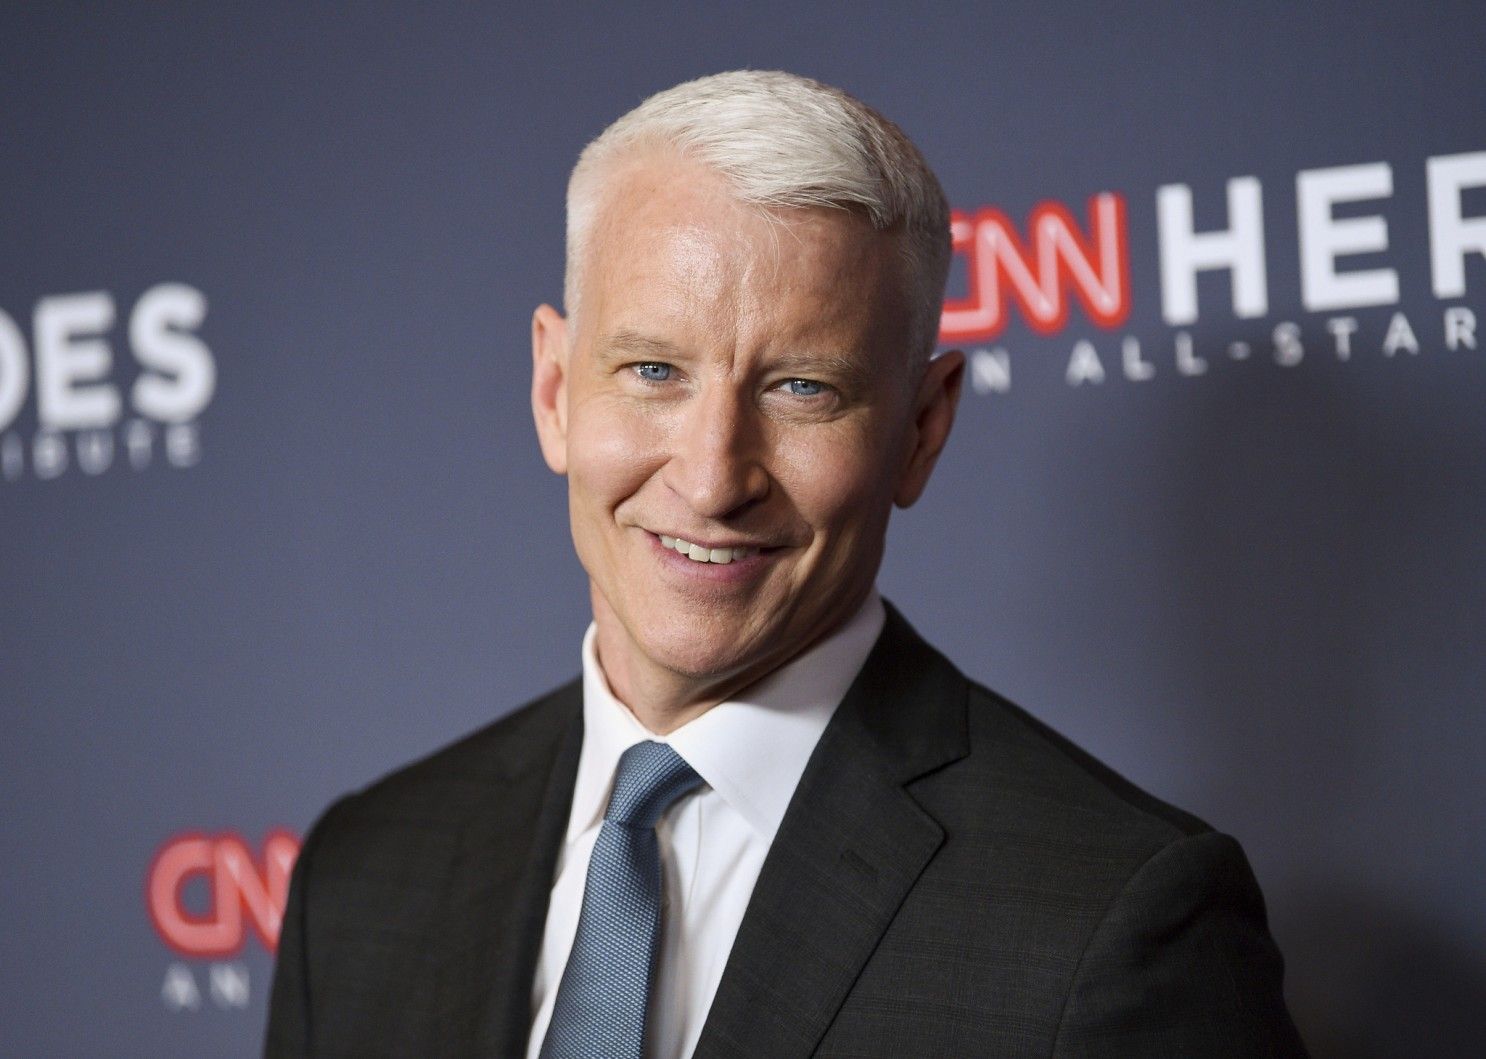 Anderson Cooper Talks About The Birth Of His Son